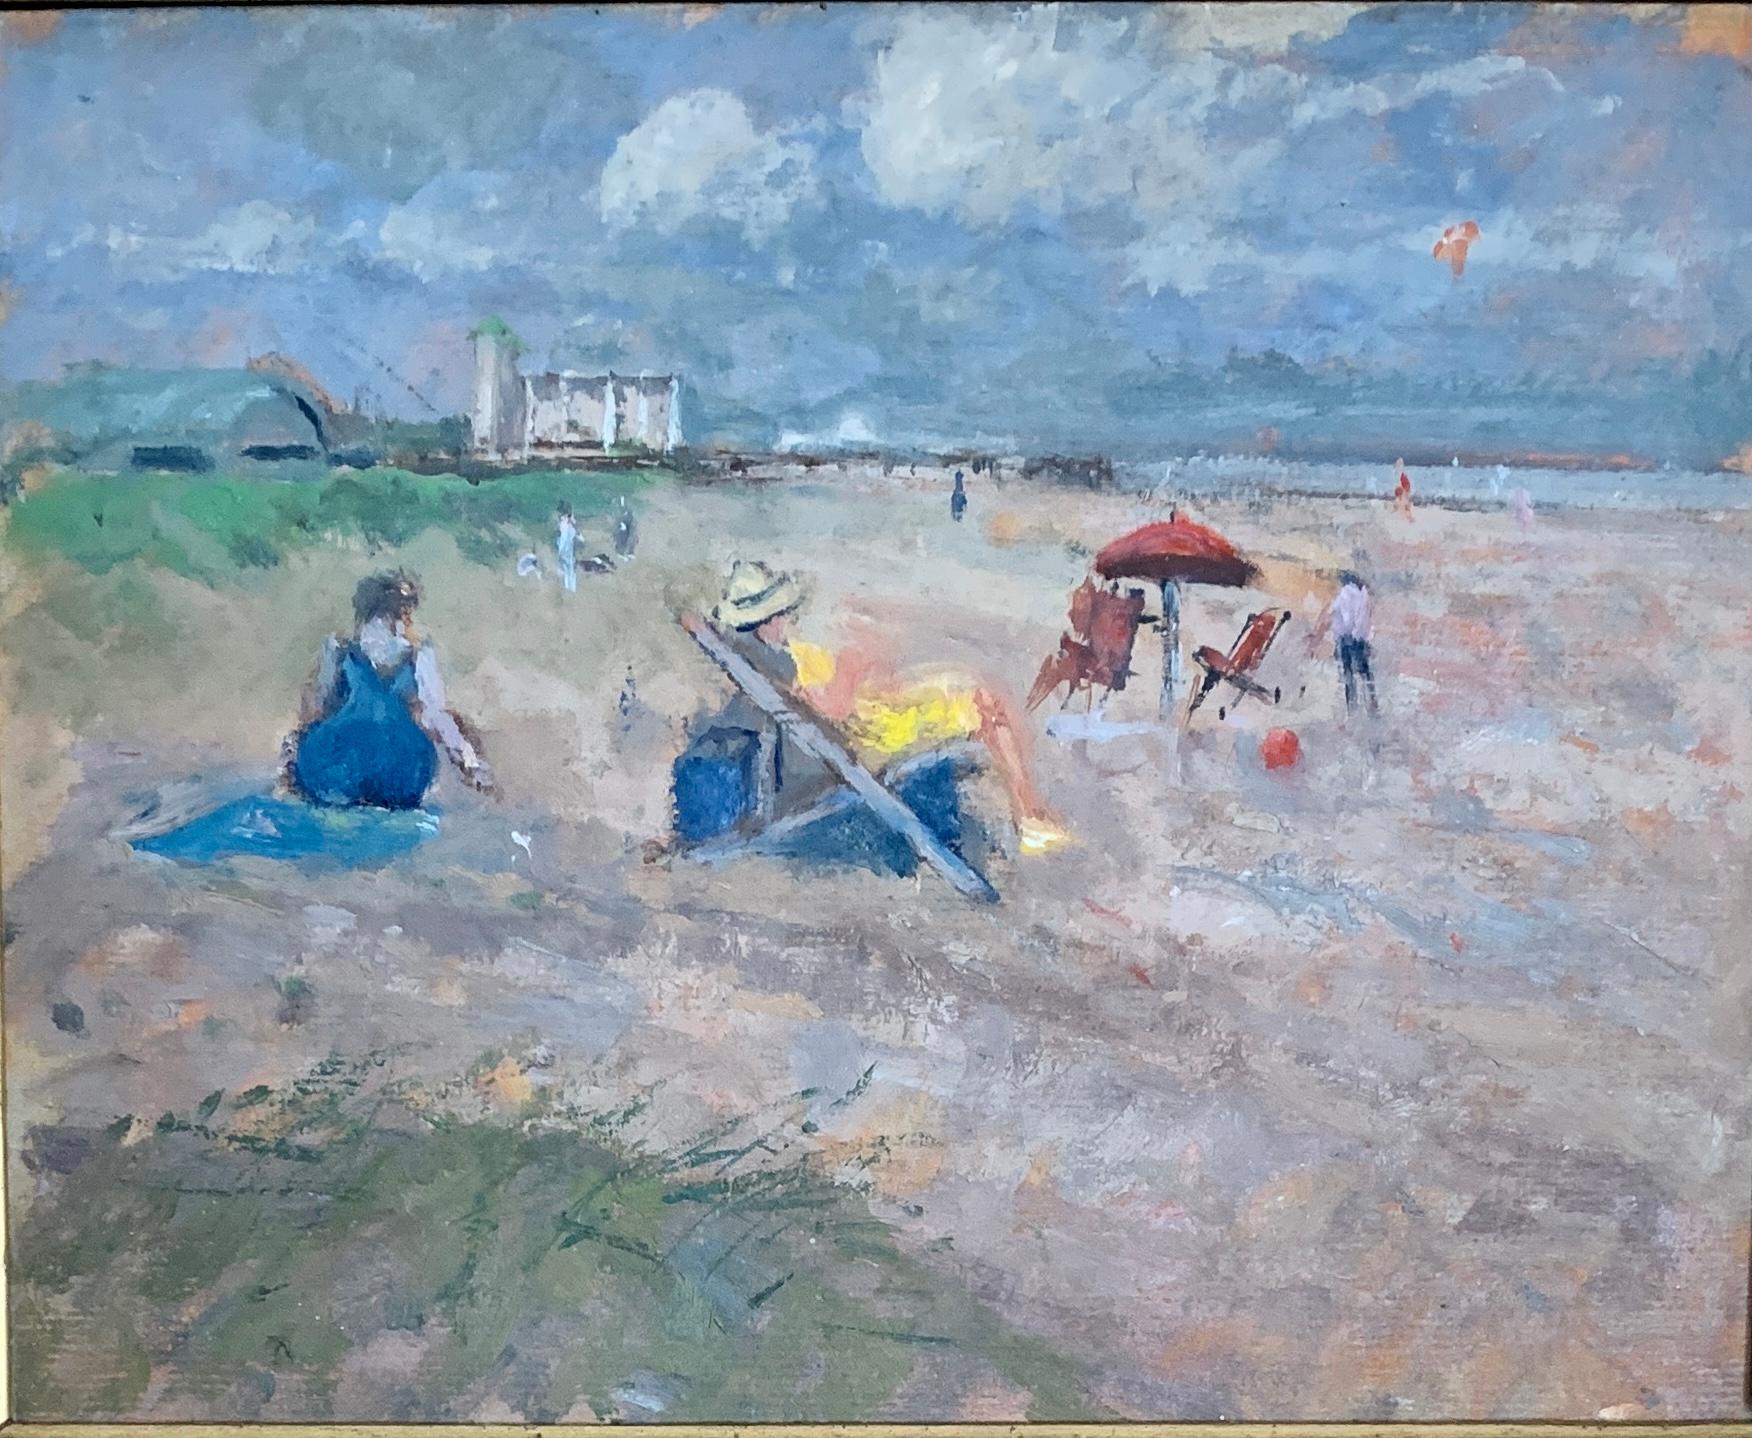 English Impressionist 20th century, Figures on a beach, Great Yarmouth, England - Painting by Keith Johnson